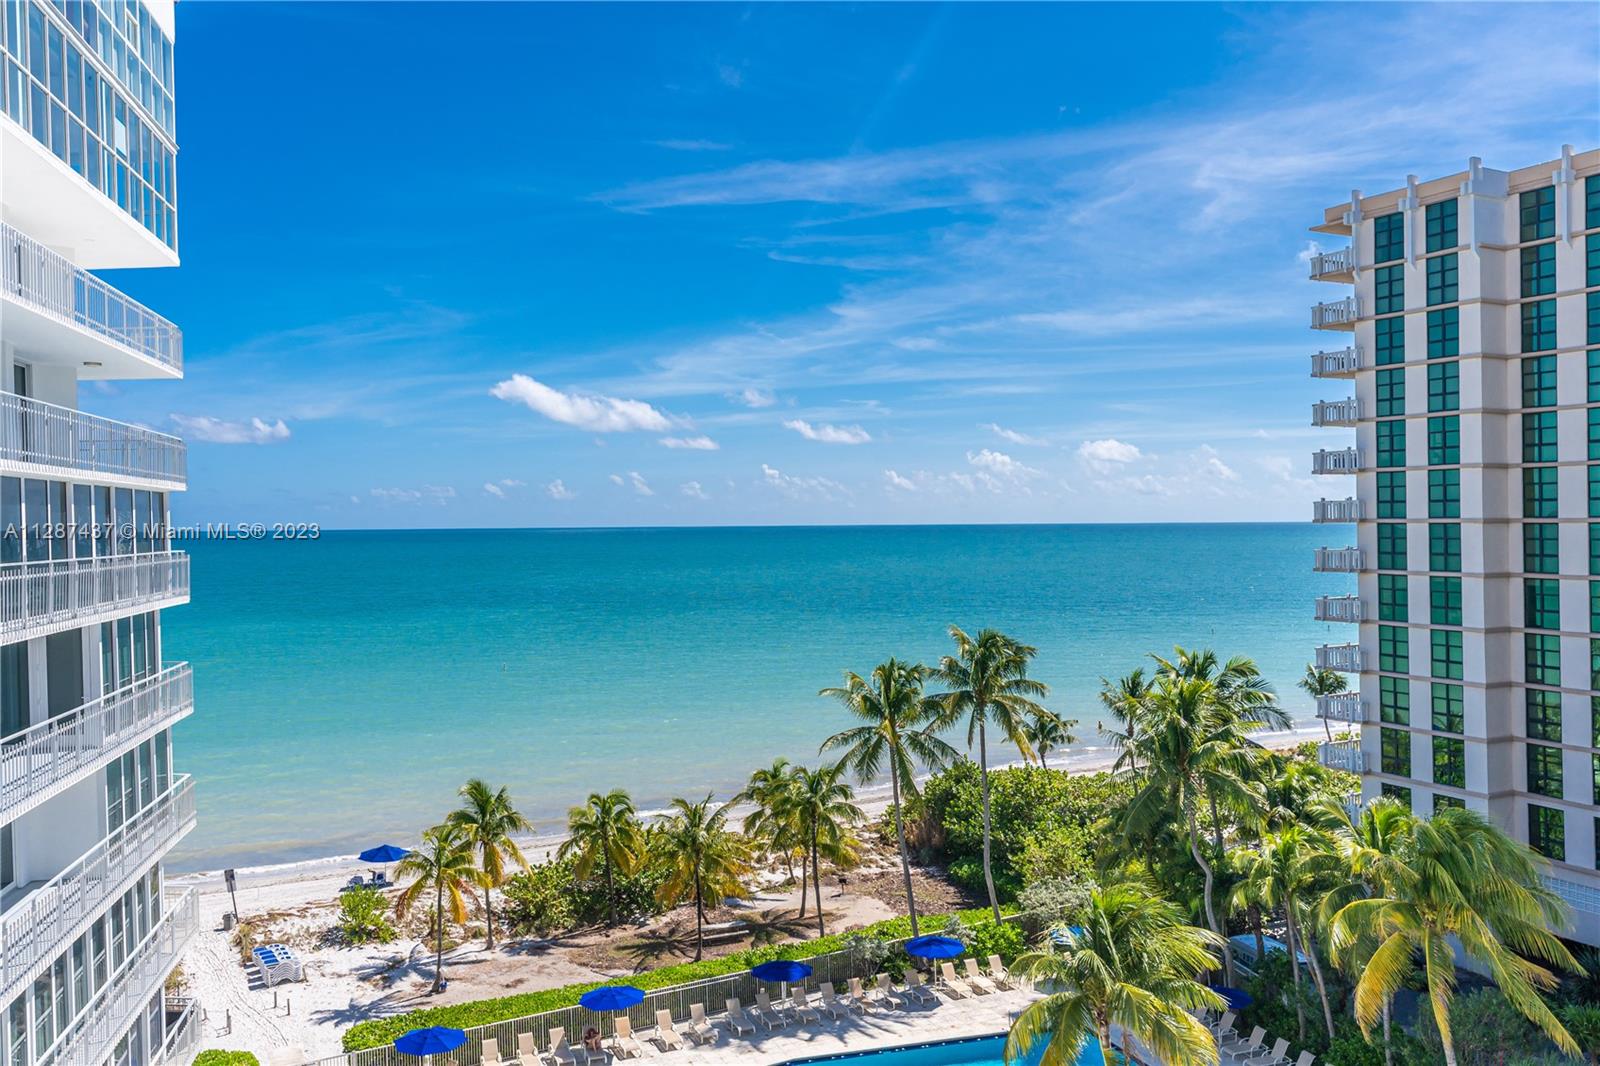 Bright and luminous South-East facing 3BR/3BA unit with nice ocean views at beachfront Mar Azul condo in Key Biscayne. Highly sought-after C floor plan with 2,841sf (as per appraiser). Located in recently renovated Mar Azul Condo, boutique building with only 126 units, this stunning unit features floor-to-ceiling impact windows with ocean views, 3 spacious bedrooms filled with lots of natural light, custom walk-in closets in all rooms, automated blinds throughout, & laundry room. Mar Azul features private beach access, renovated lobby, BBQ, pool, gym with direct ocean views, Penthouse party room, 24-hour security gate & doorman. 2 adjacent parking spots close to semi-private elevator and additional storage unit under a/c.